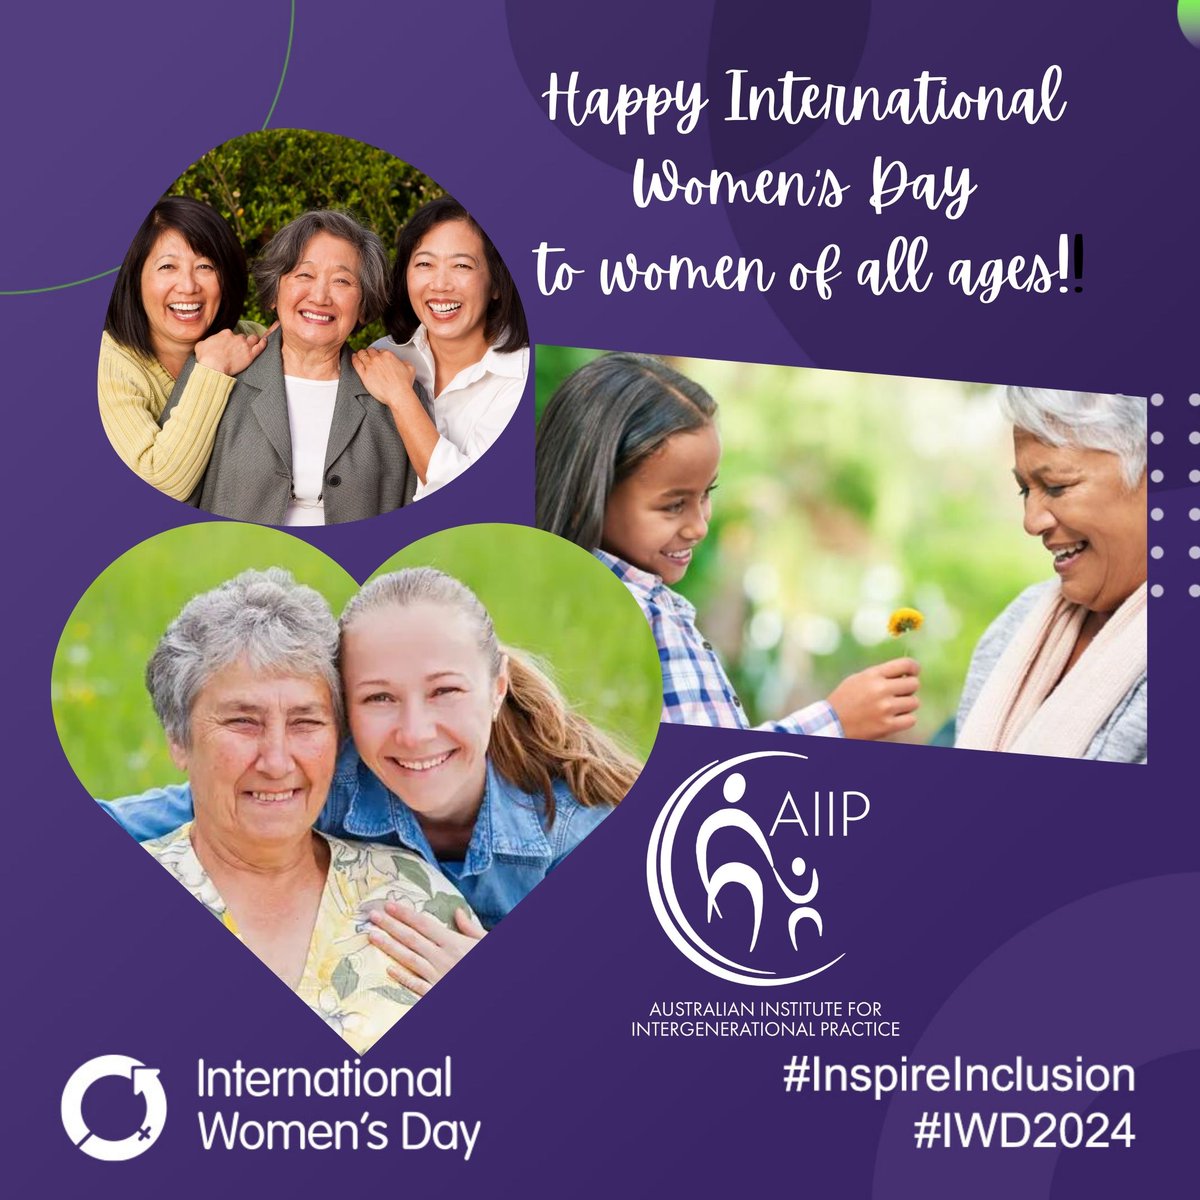 Happy International Women's Day to all women of all ages. Inclusion helps combat ageism and loneliness. #IWD2024 #intergenerationalpractice #AIIP #iwd #iwd2024womenleadingtheway #inclusion #inspireinclusion #womenyoungandold #womensday2024